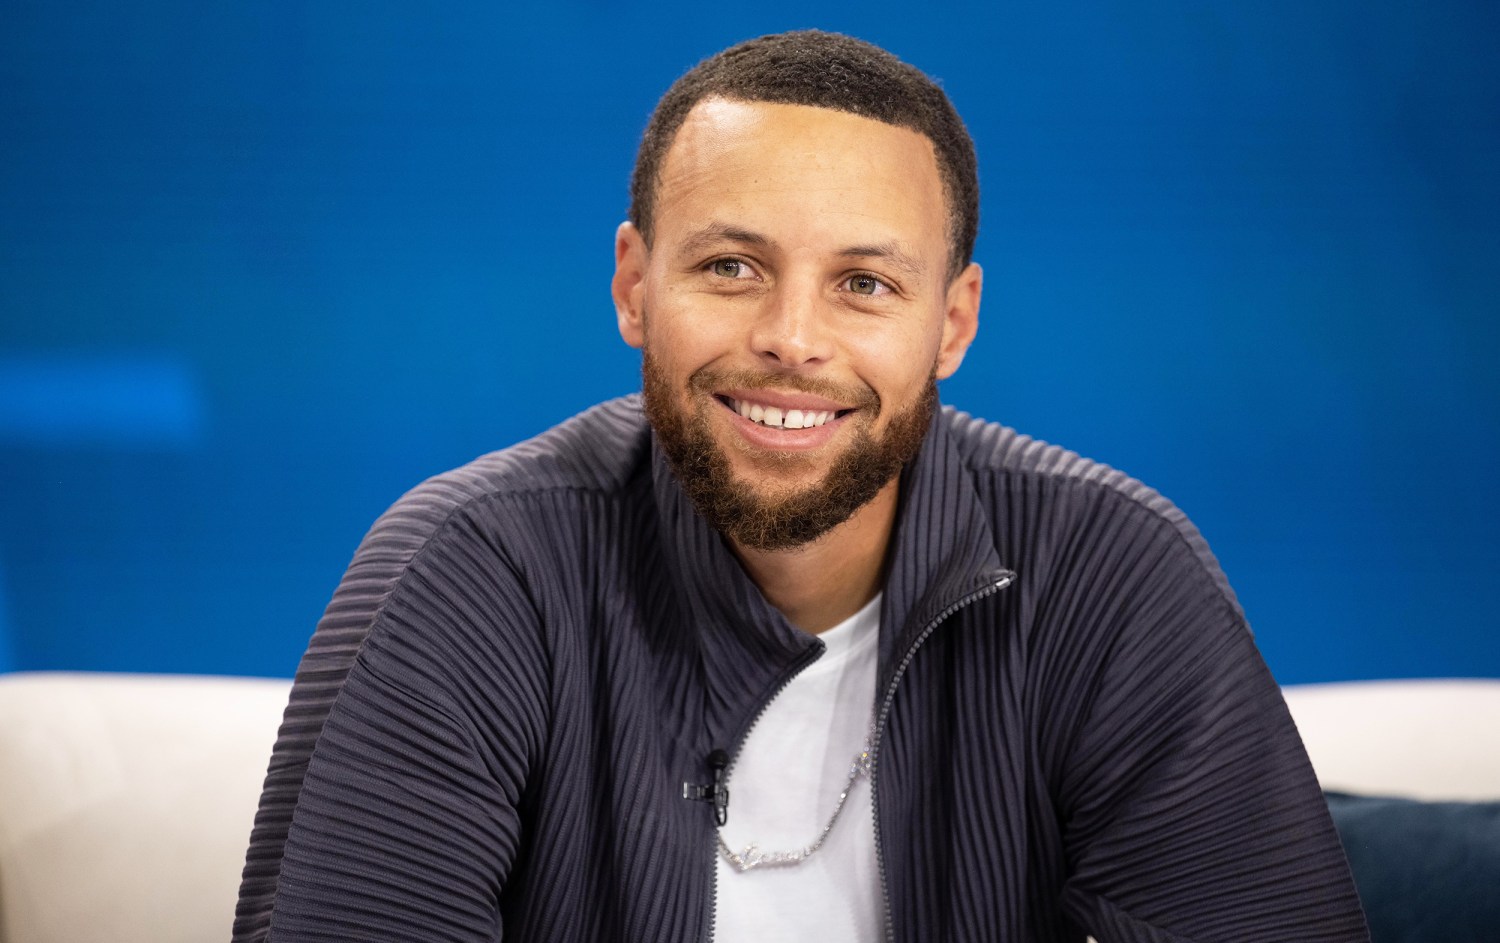 So Deceitful”: Years Before $160,000,000 Riches, Stephen Curry